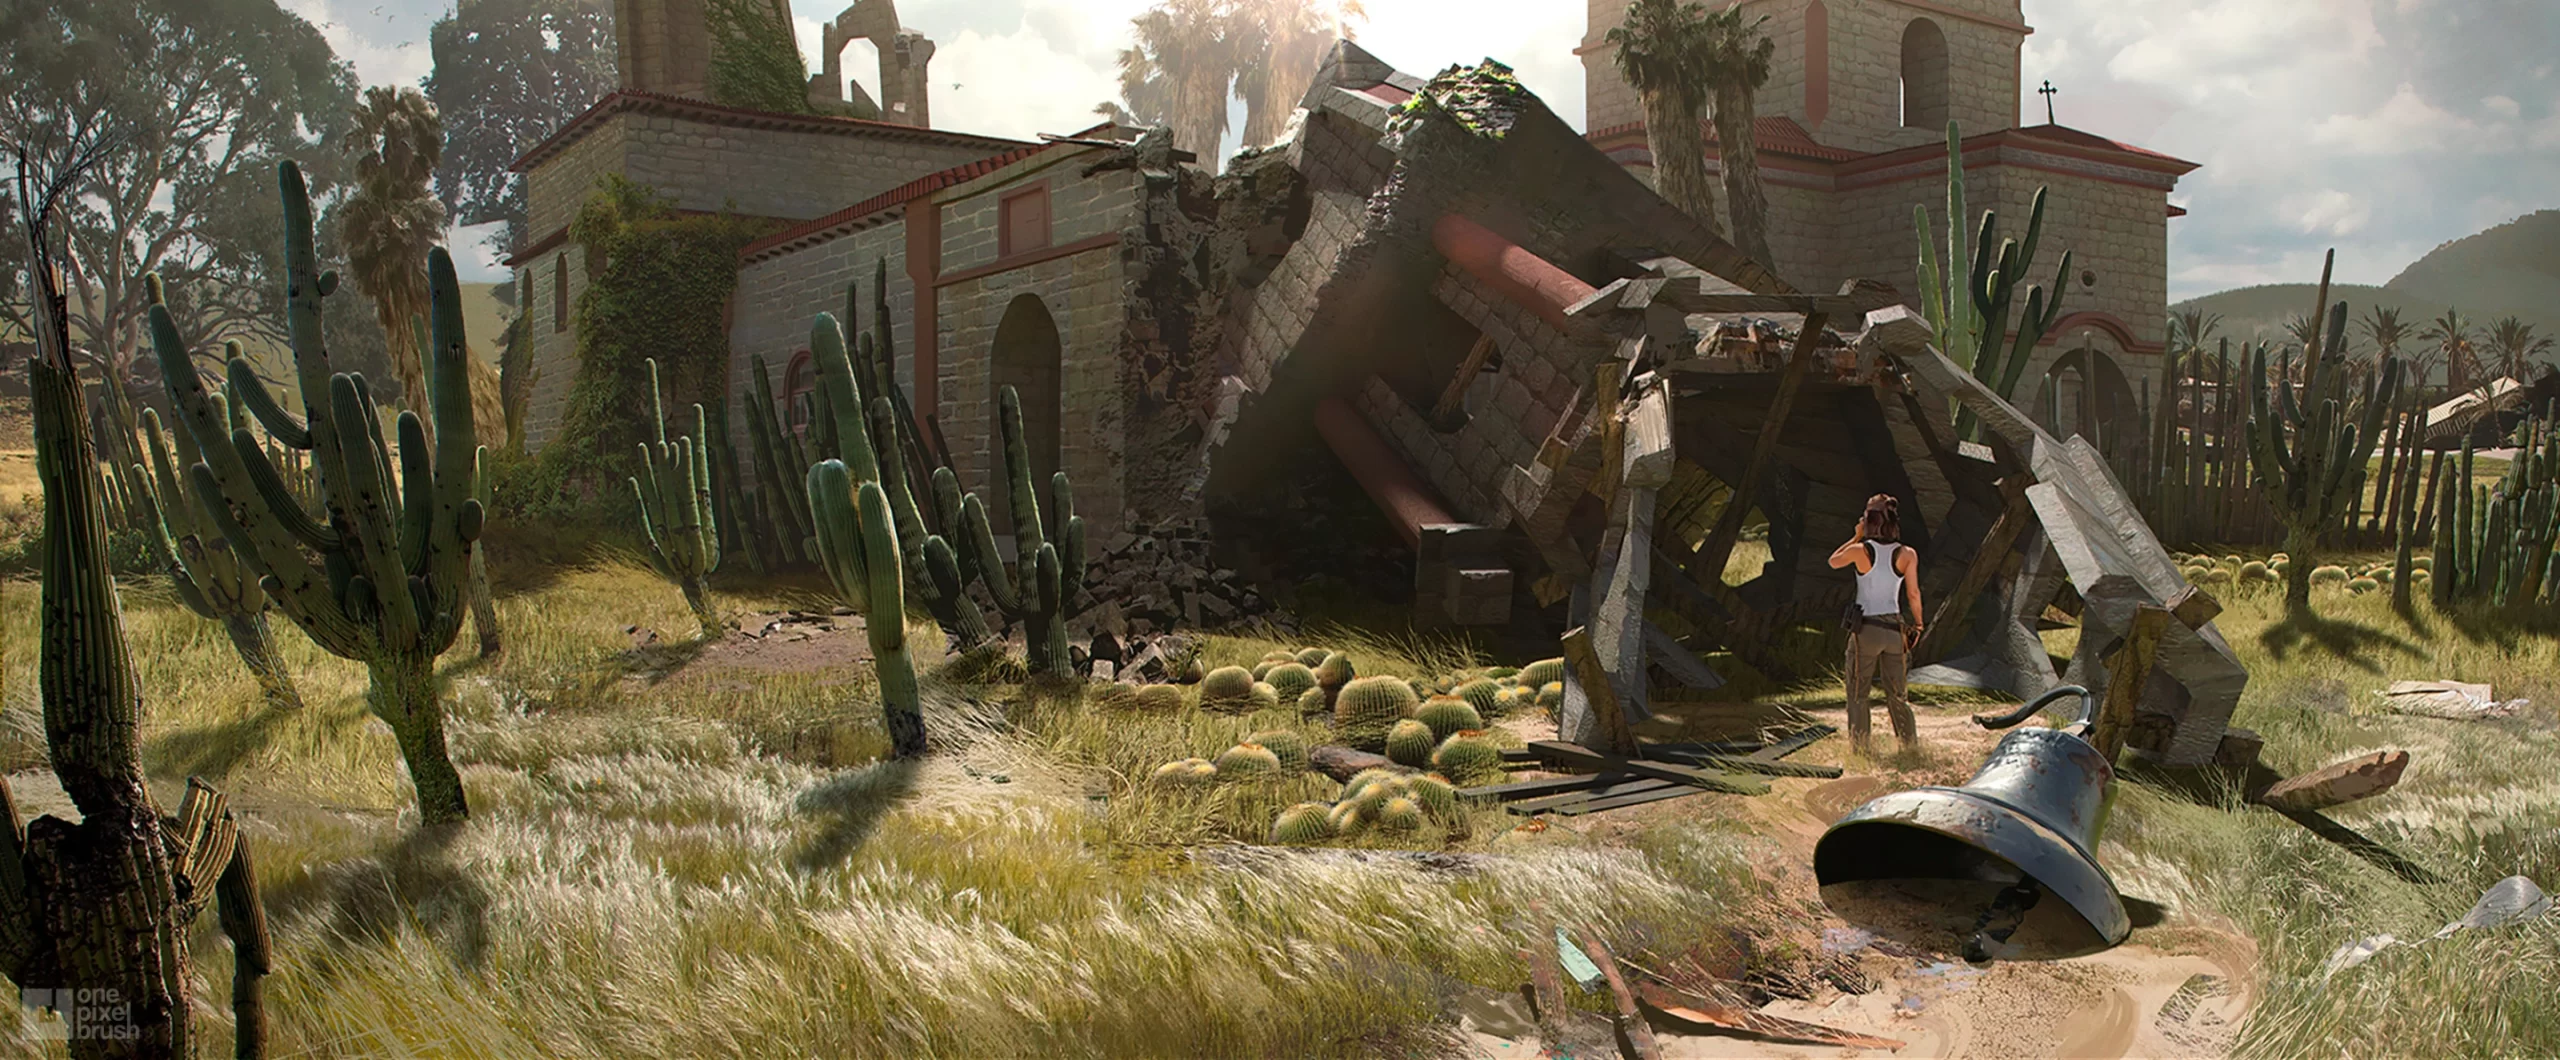 the-last-of-us-2-video-game-concept-art-post-apocalyptistic-environment-2880x1193